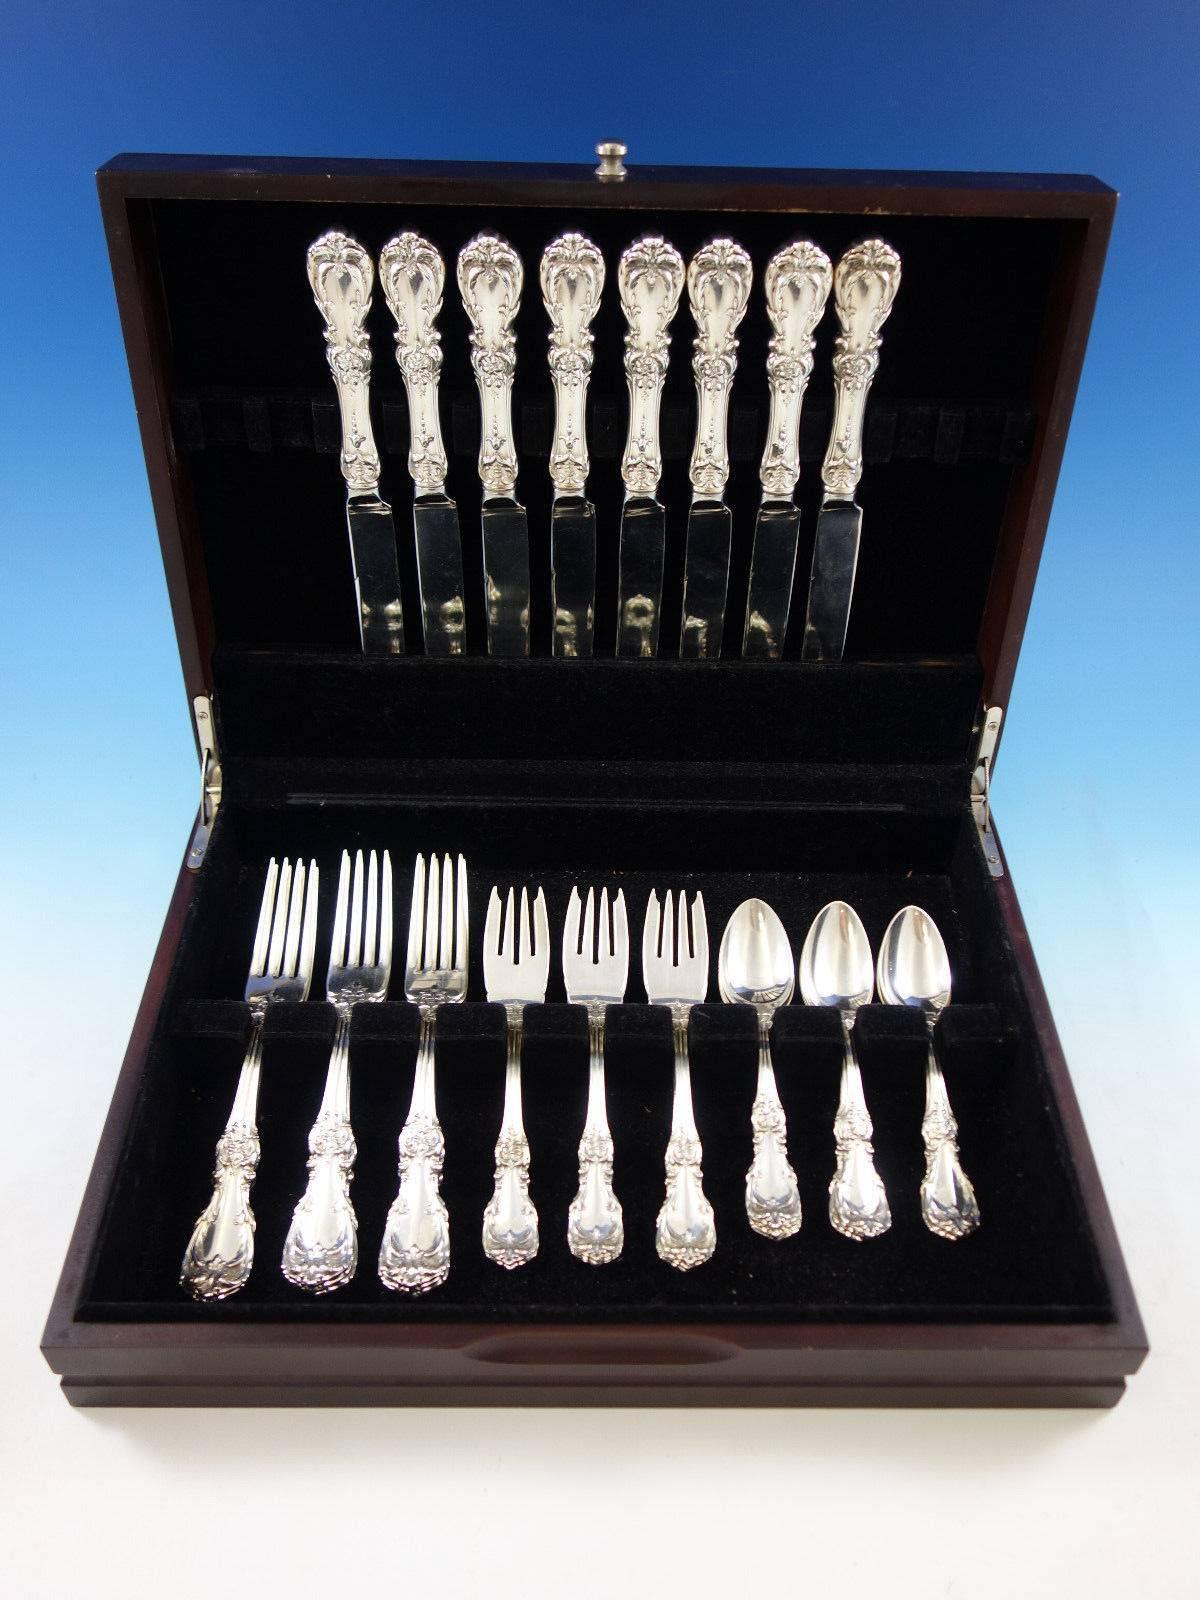 Burgundy by Reed & Barton sterling silver dinner size flatware set of 32 pieces. This set includes: 

Eight dinner size knives, 9 3/4